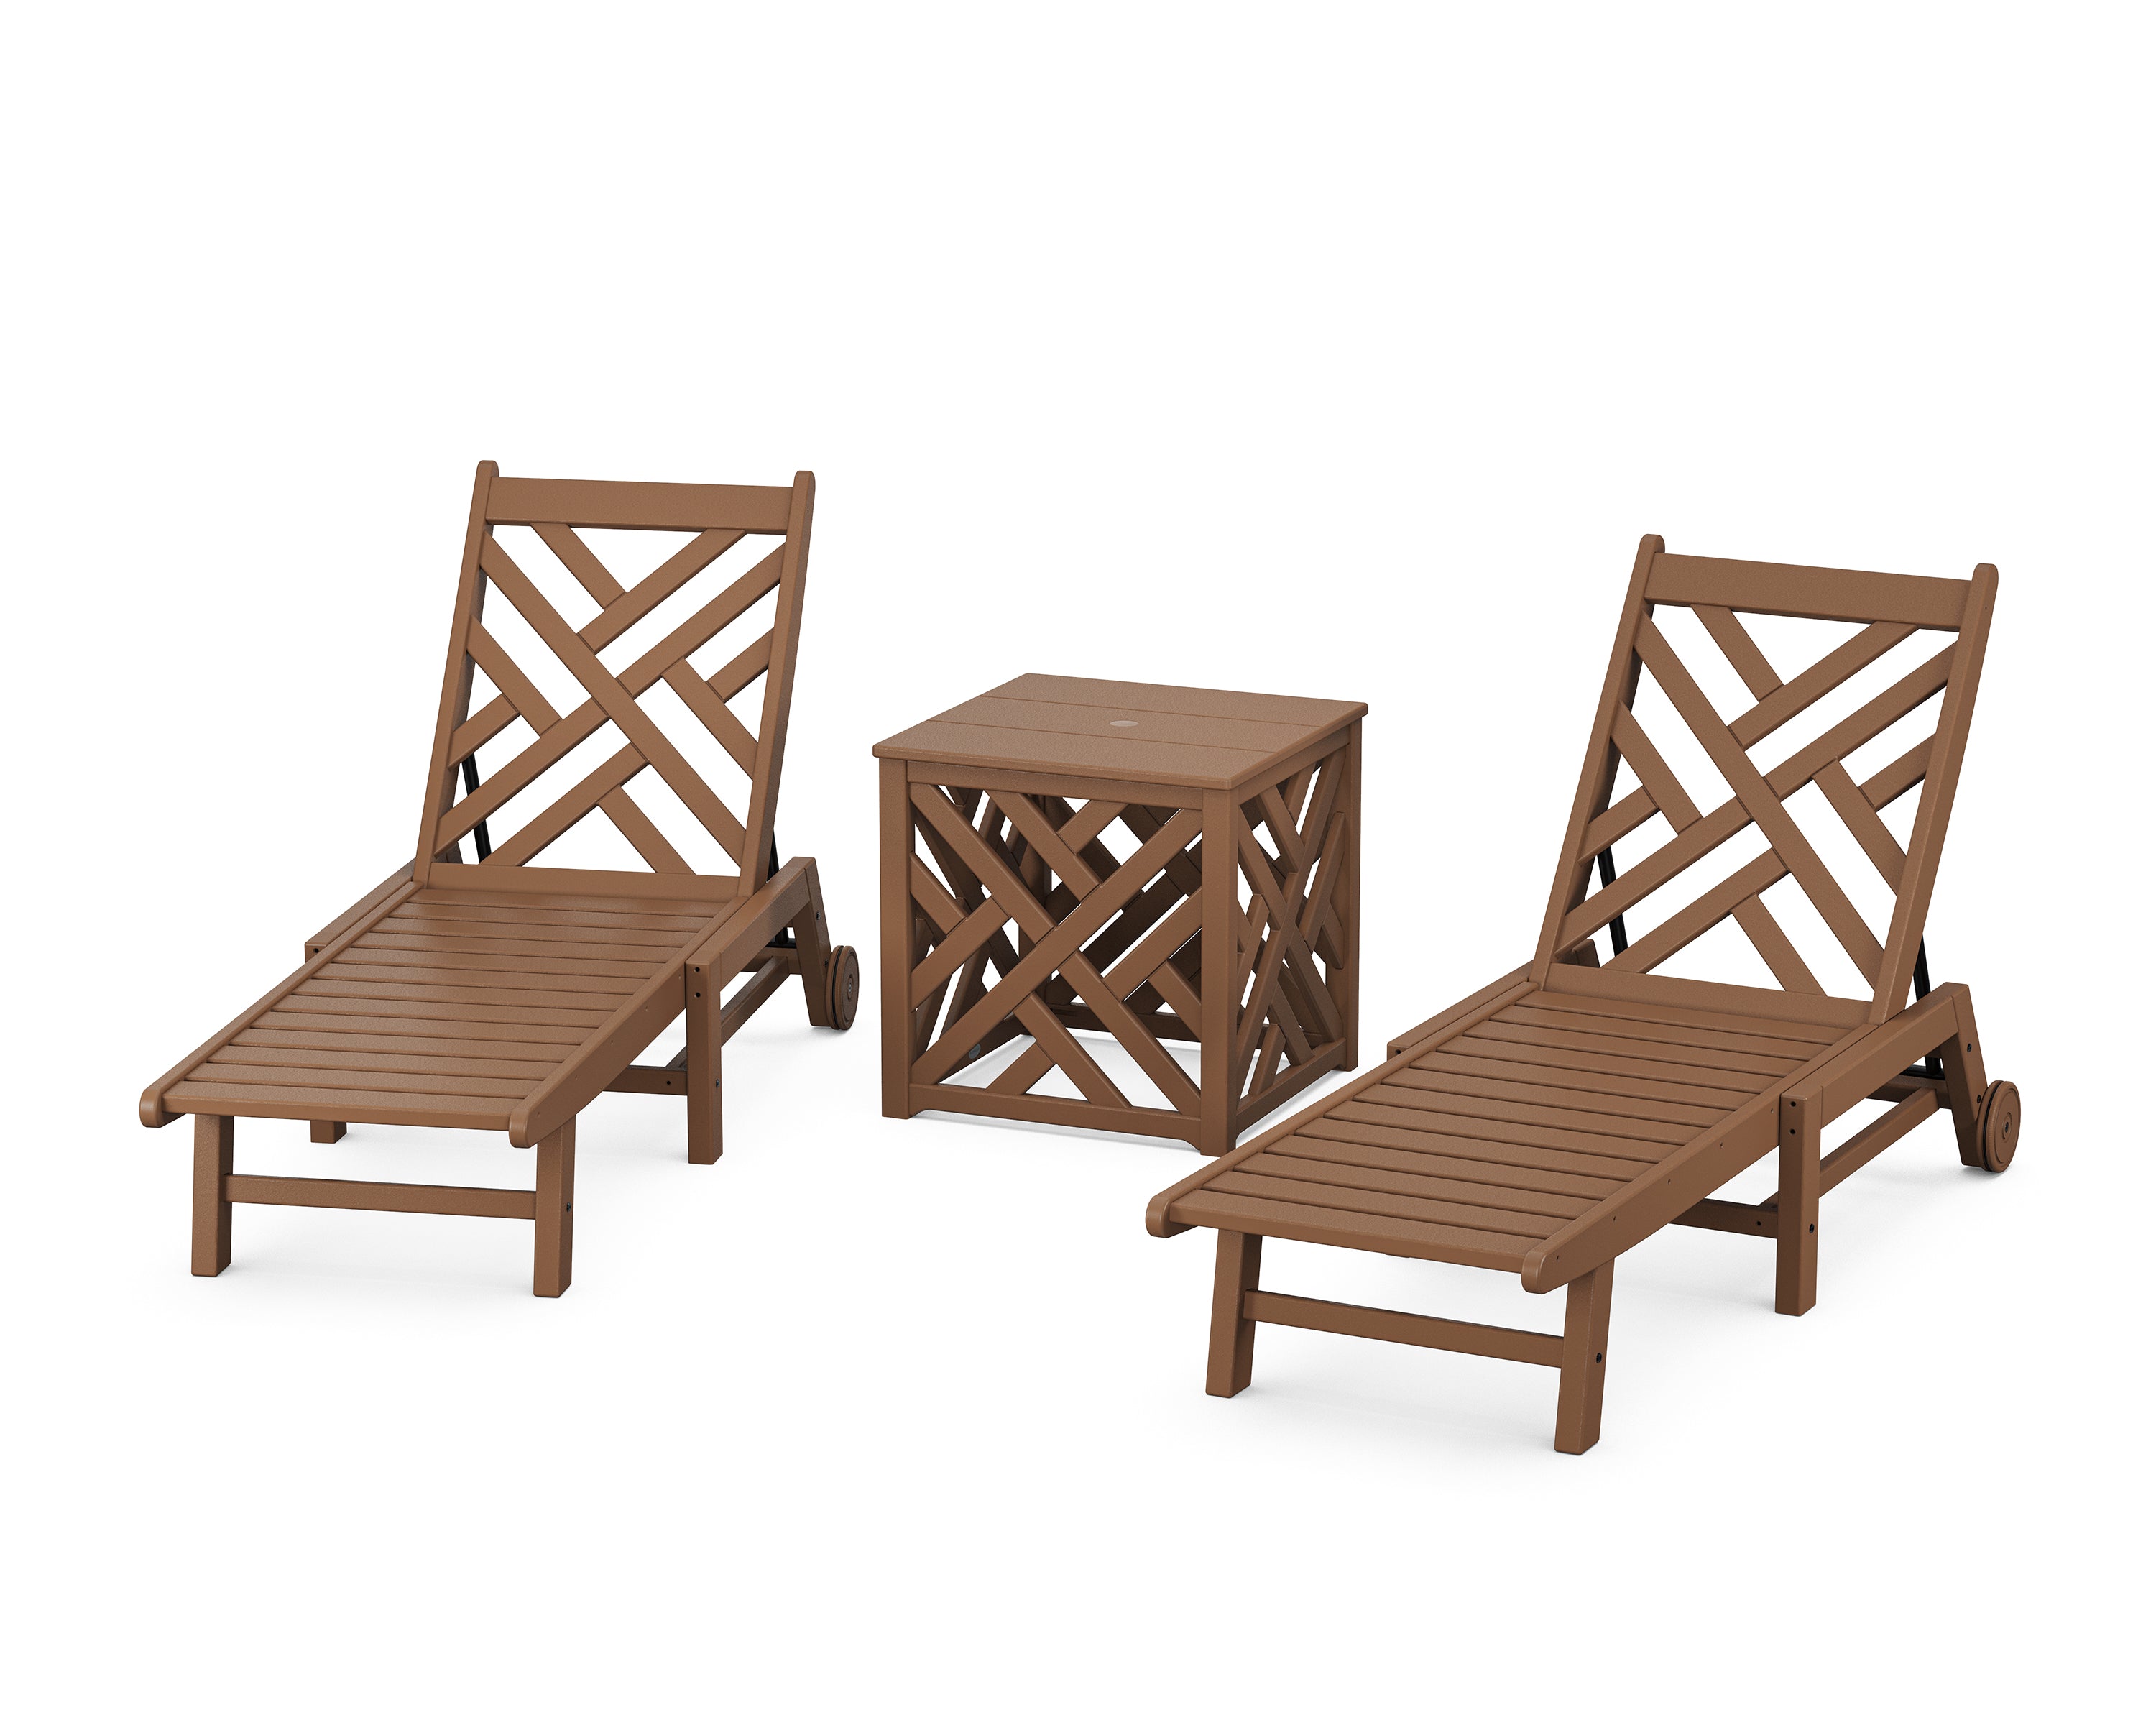 POLYWOOD Chippendale 3-Piece Chaise Set with Wheels and Umbrella Stand Accent Table in Teak